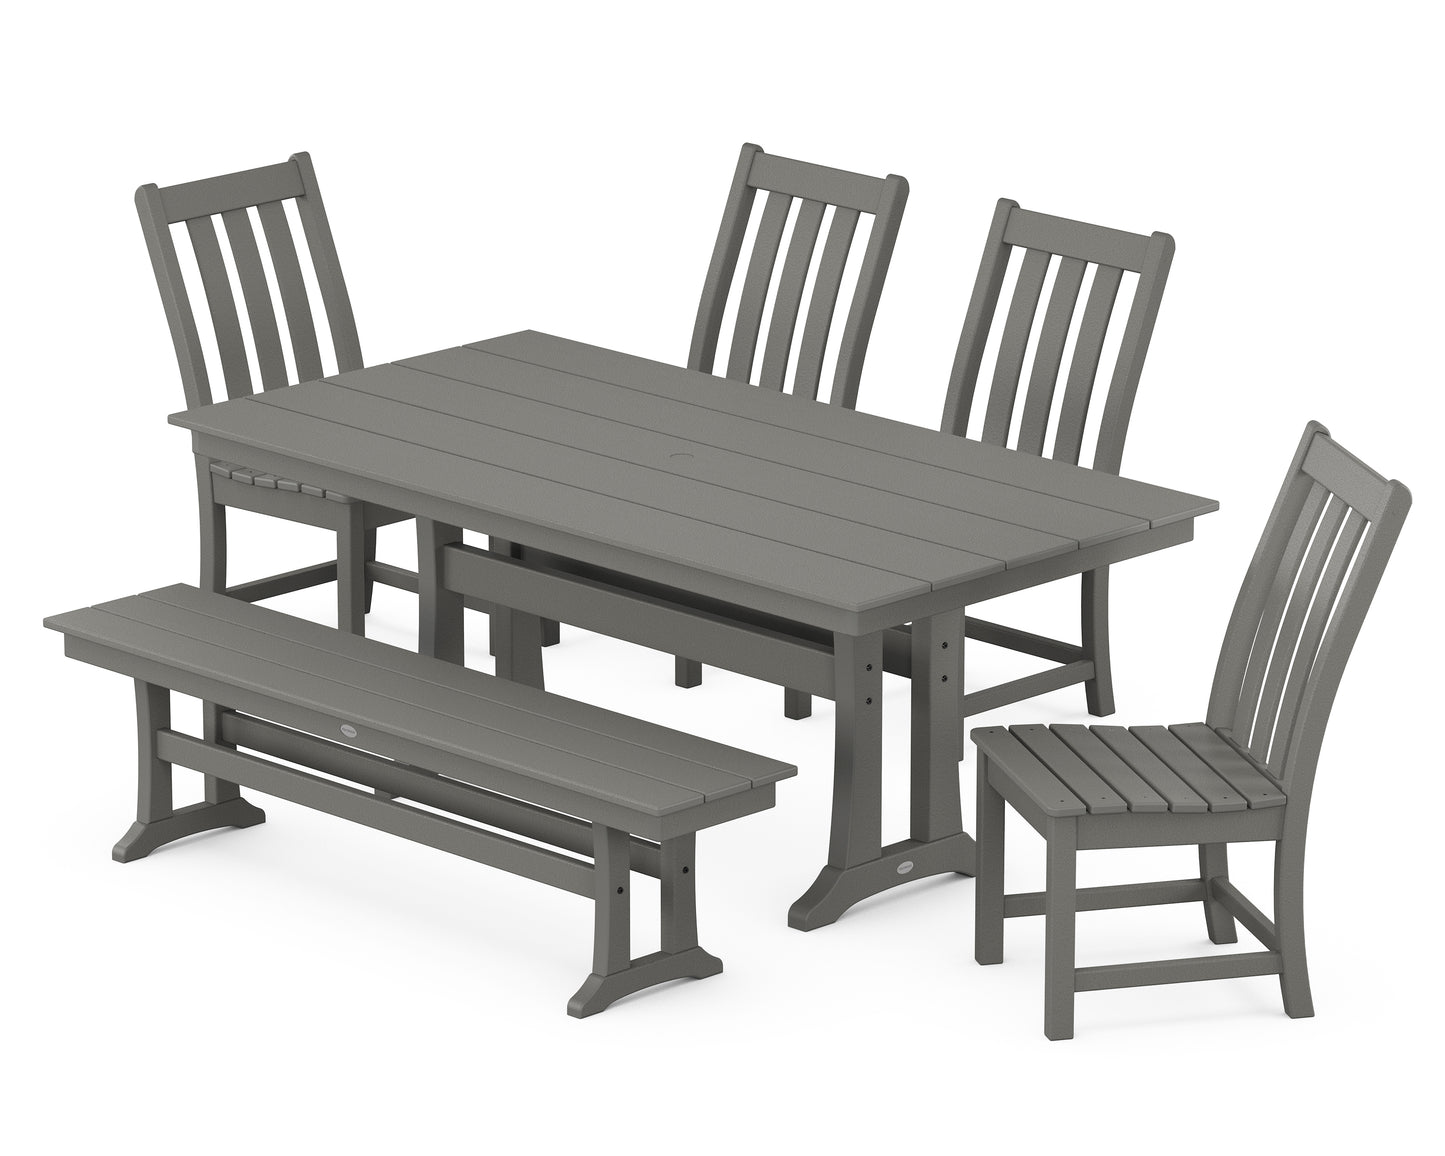 Vineyard Side Chair 6-Piece Farmhouse Dining Set with Trestle Legs and Bench